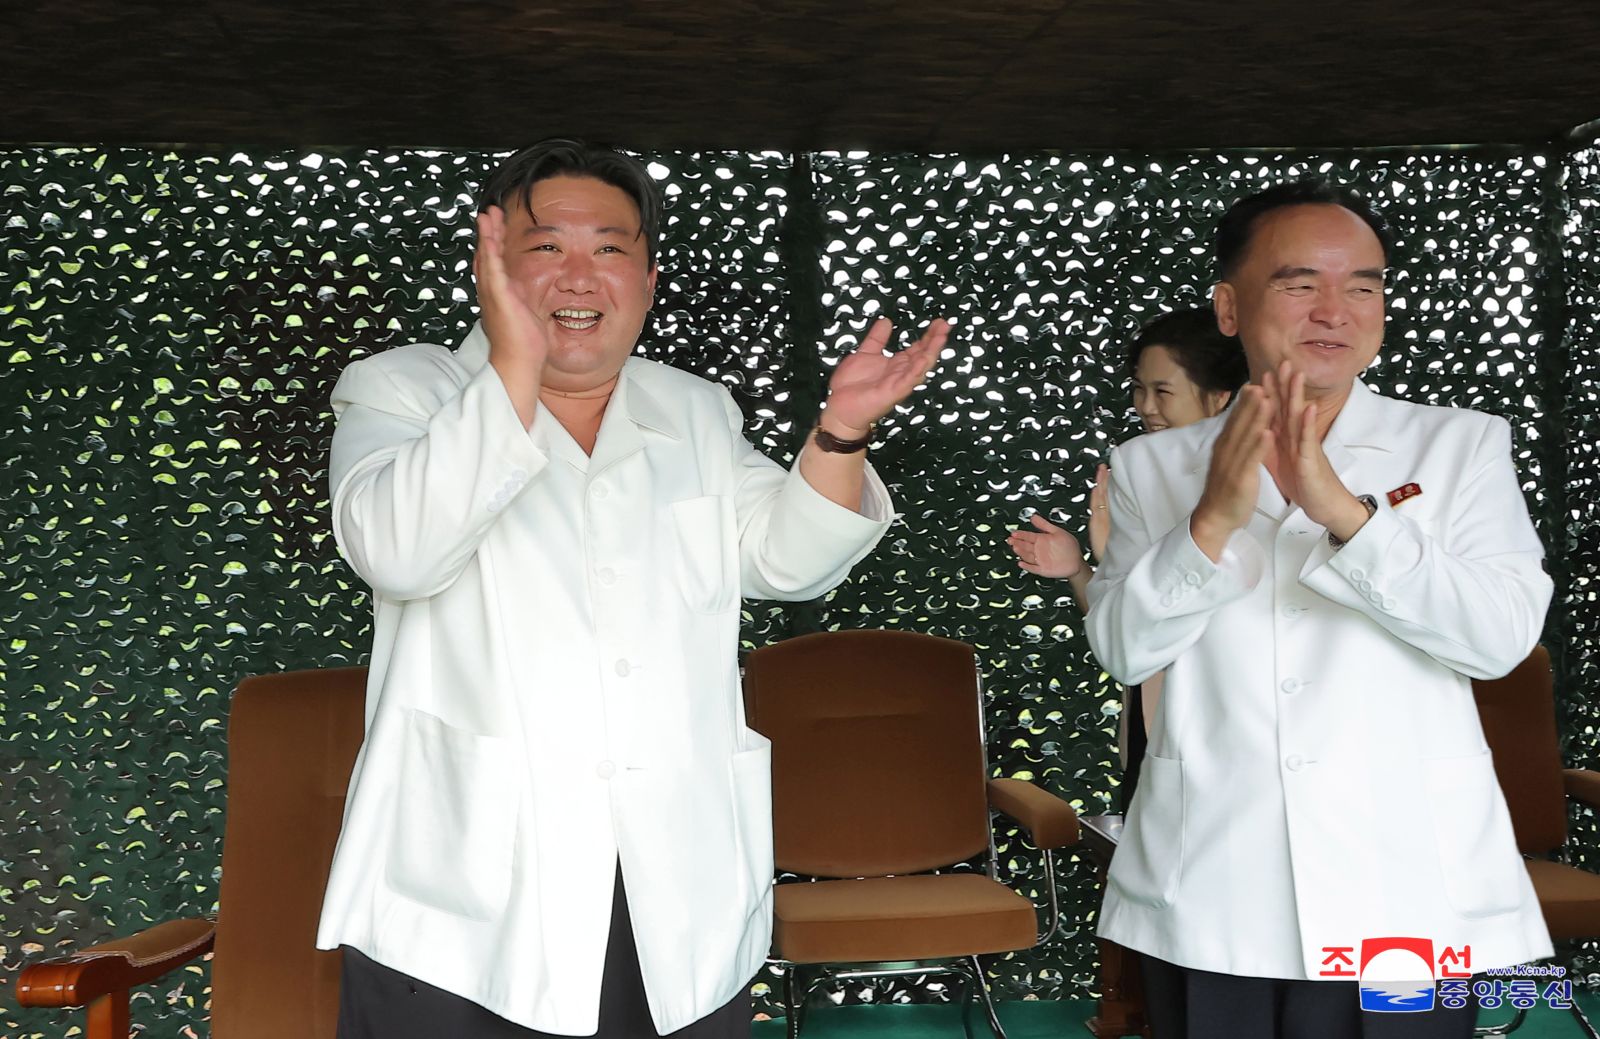 epa10742748 A photo released by the official North Korean Central News Agency (KCNA) shows North Korean leader Kim Jong Un (L) and Jo Yong-won (R), secretary for organizational affairs of the central committee of the Workers' Party, attending the test-firing of a Hwasong-18 solid-fuel intercontinental ballistic missile (ICBM), at an undisclosed location in North Korea, 12 July 2023 (issued 13 July 2023). According to KCNA, the missile travelled at a maximum altitude of 6,648.4 kilometres and flew a distance of 1,001.2 kilometres for 4,491 seconds before landing in the open waters off the East Sea of Korea.  EPA/KCNA   EDITORIAL USE ONLY